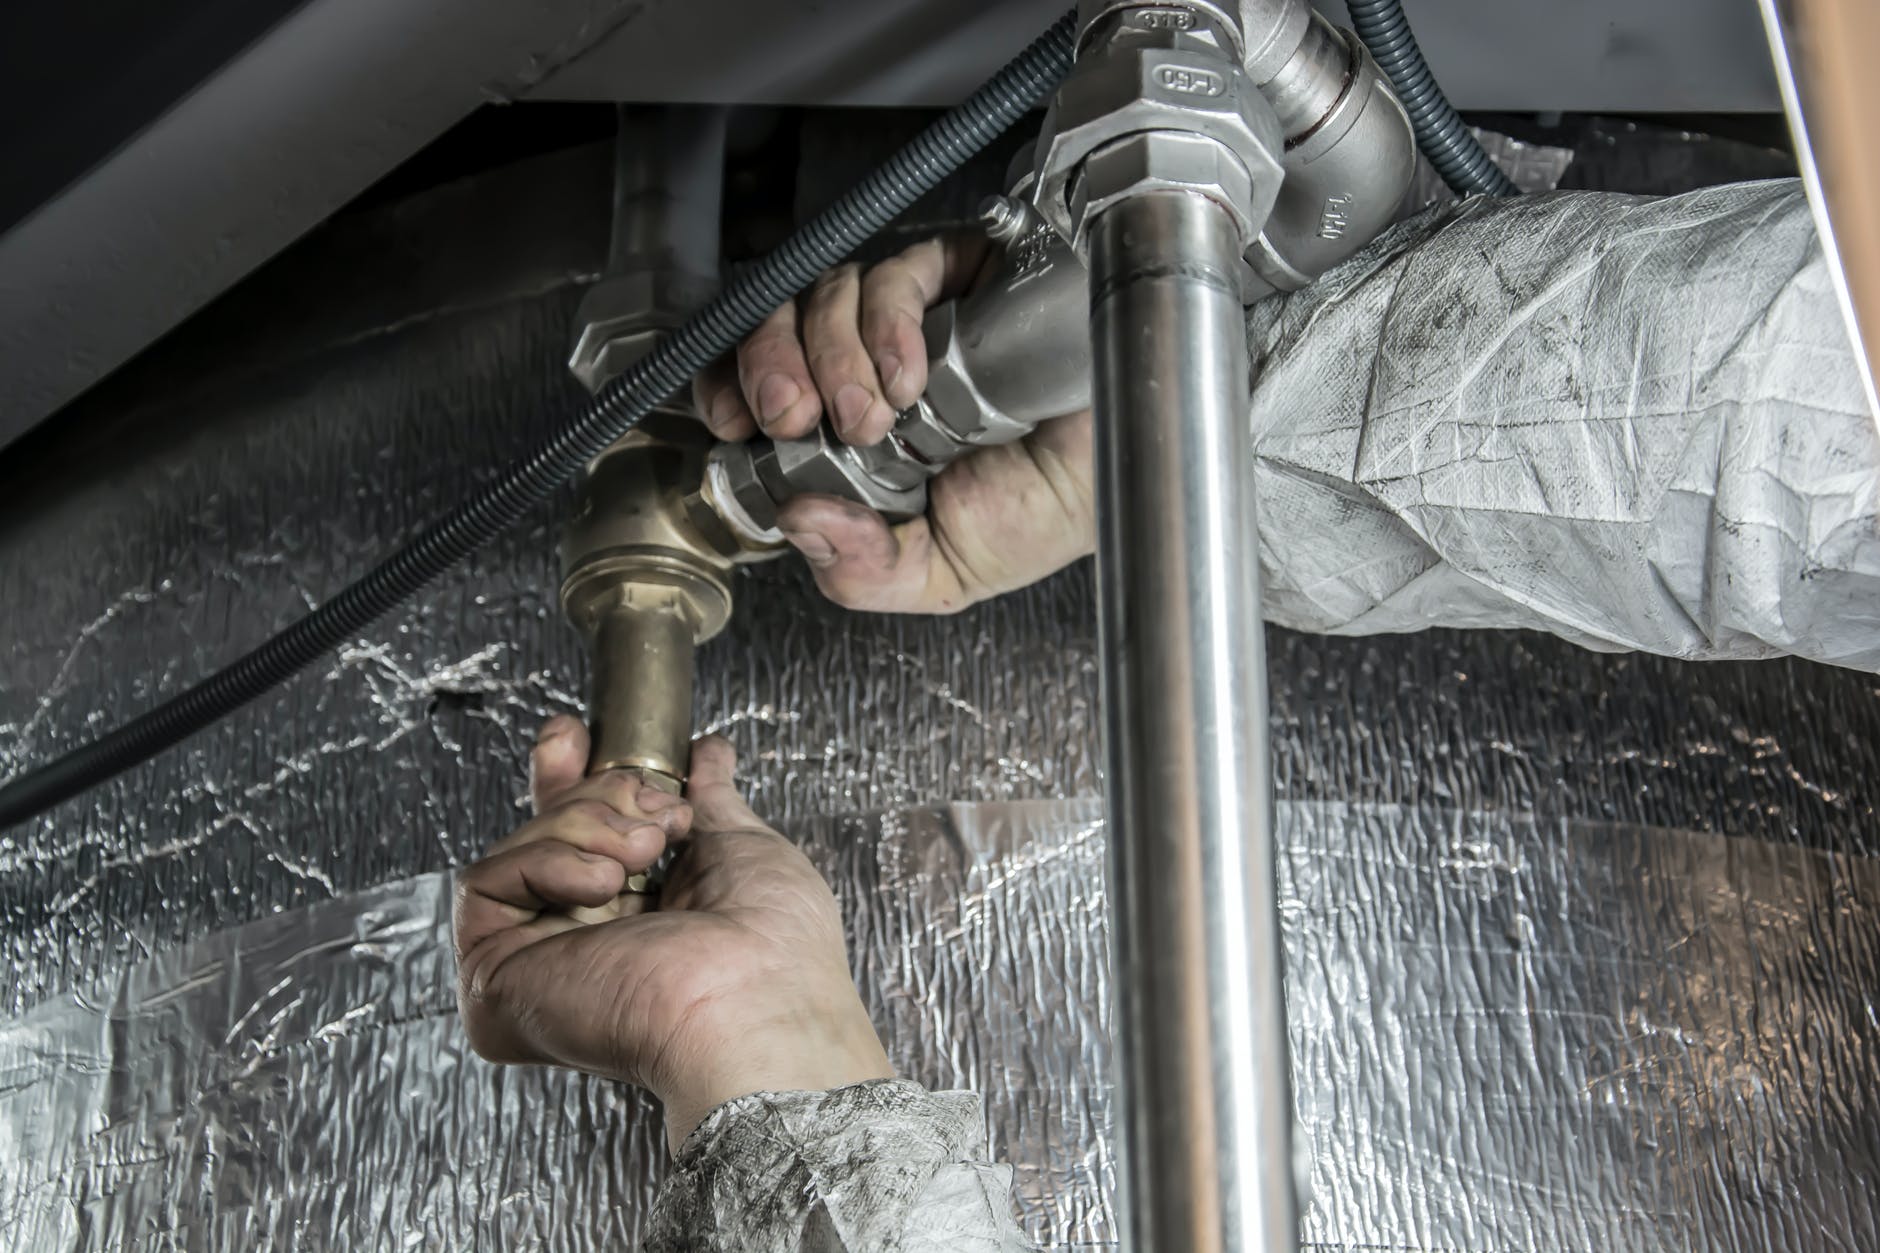 NAICS code for Plumbers Heating, and Air-Conditioning Contractors